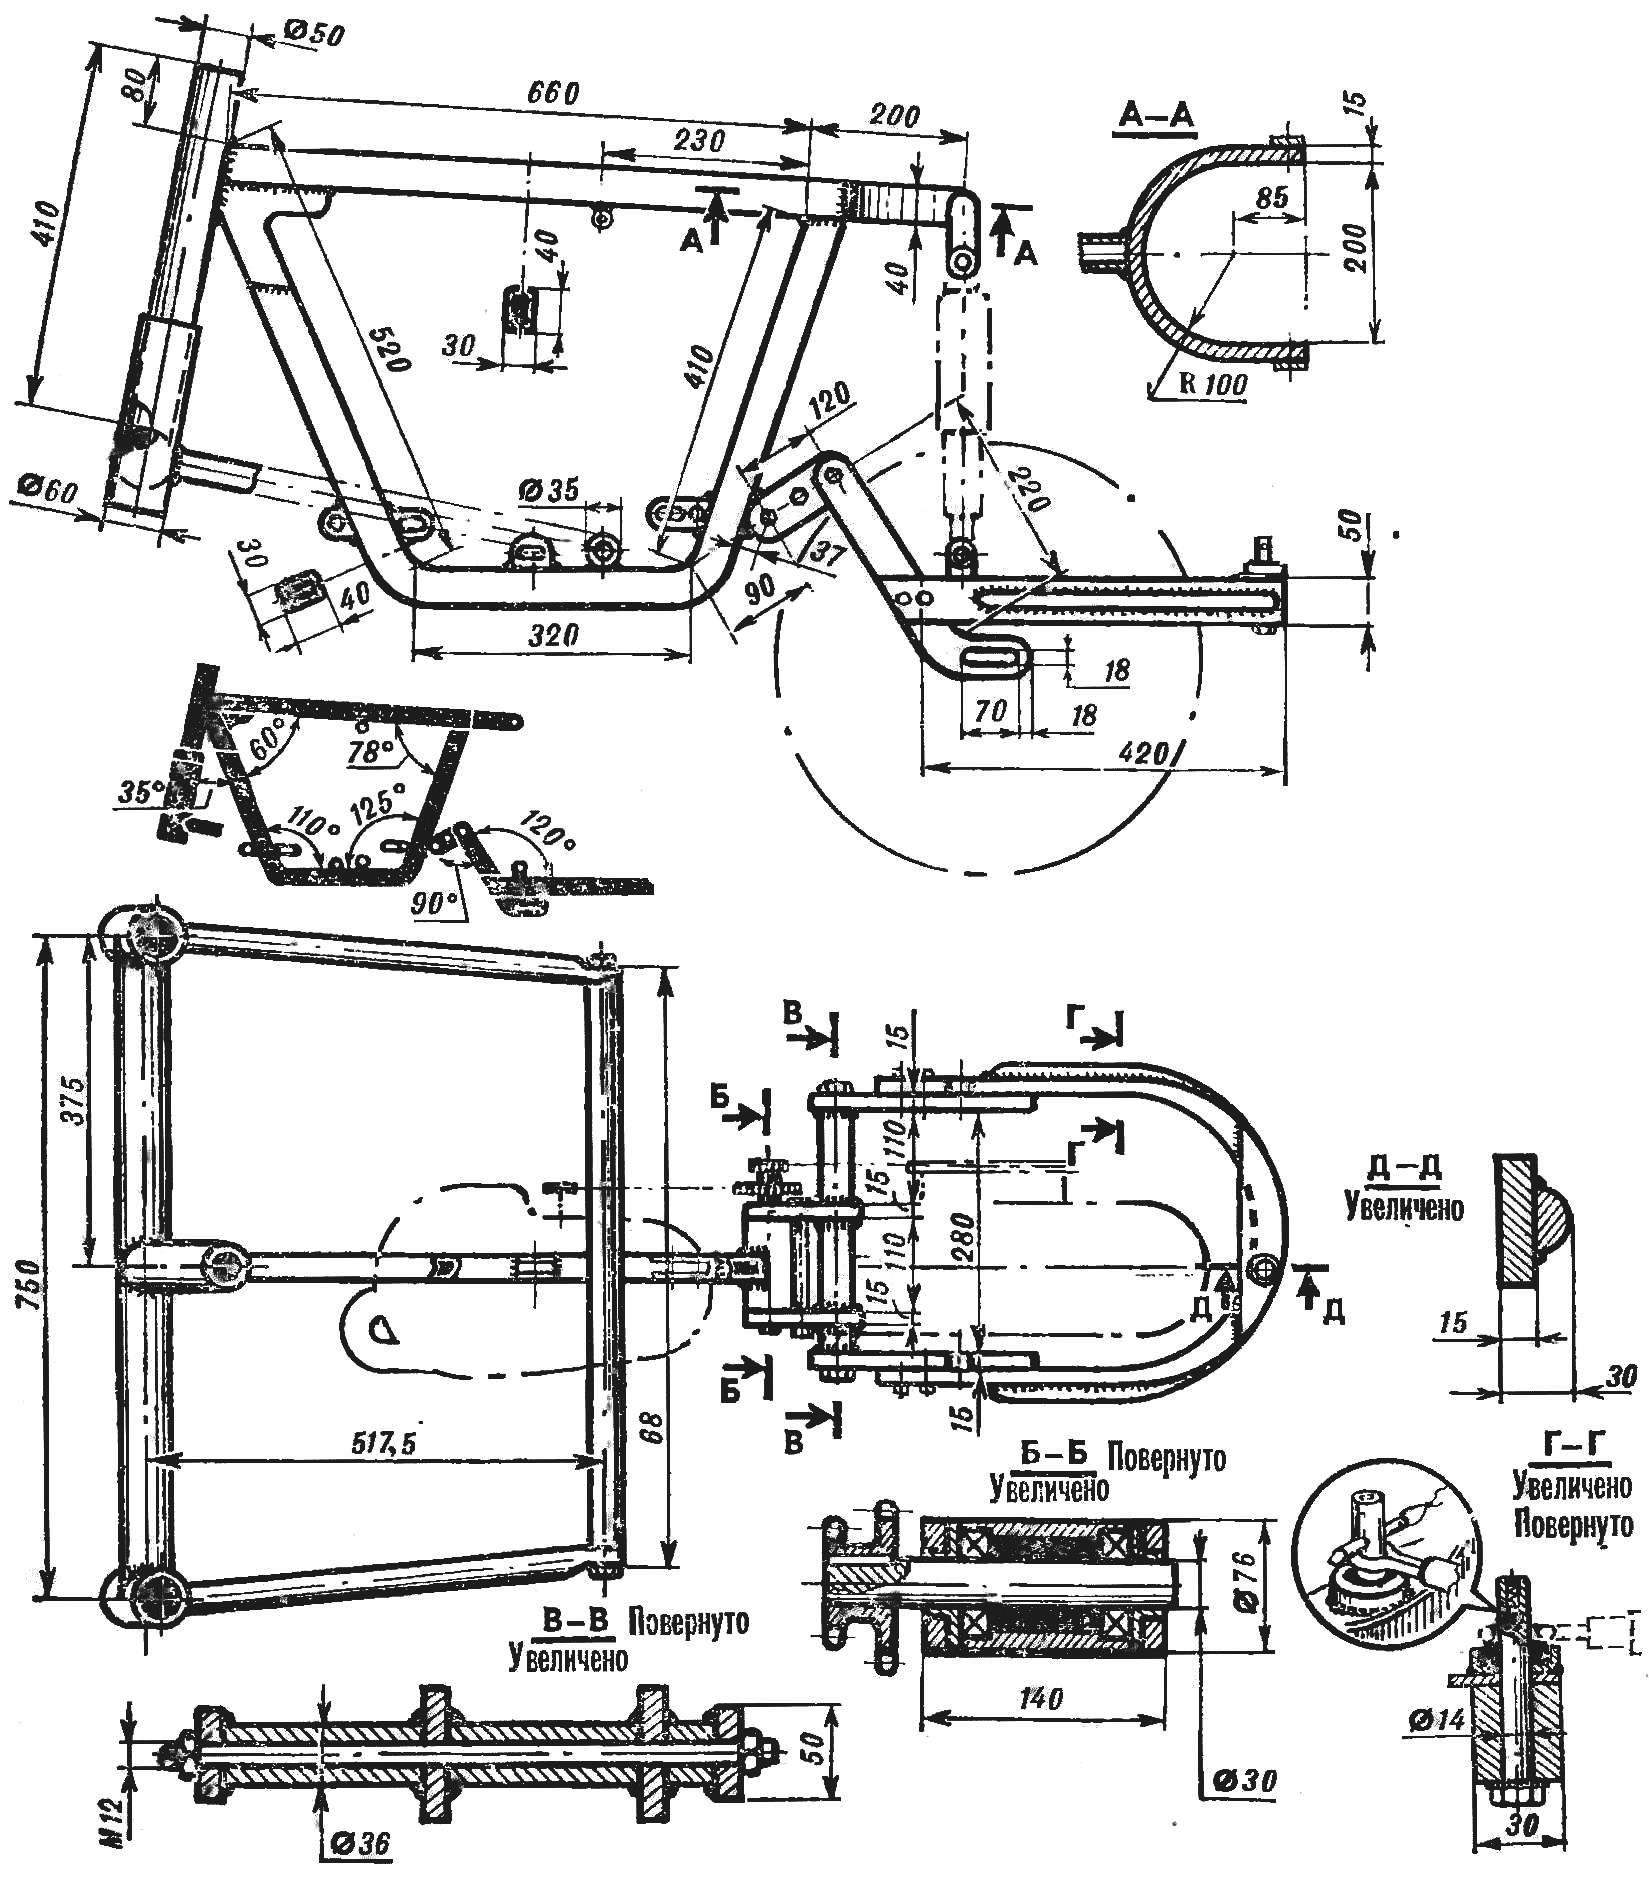 Fig. 2. The frame with drive units and suspension rear wheels.